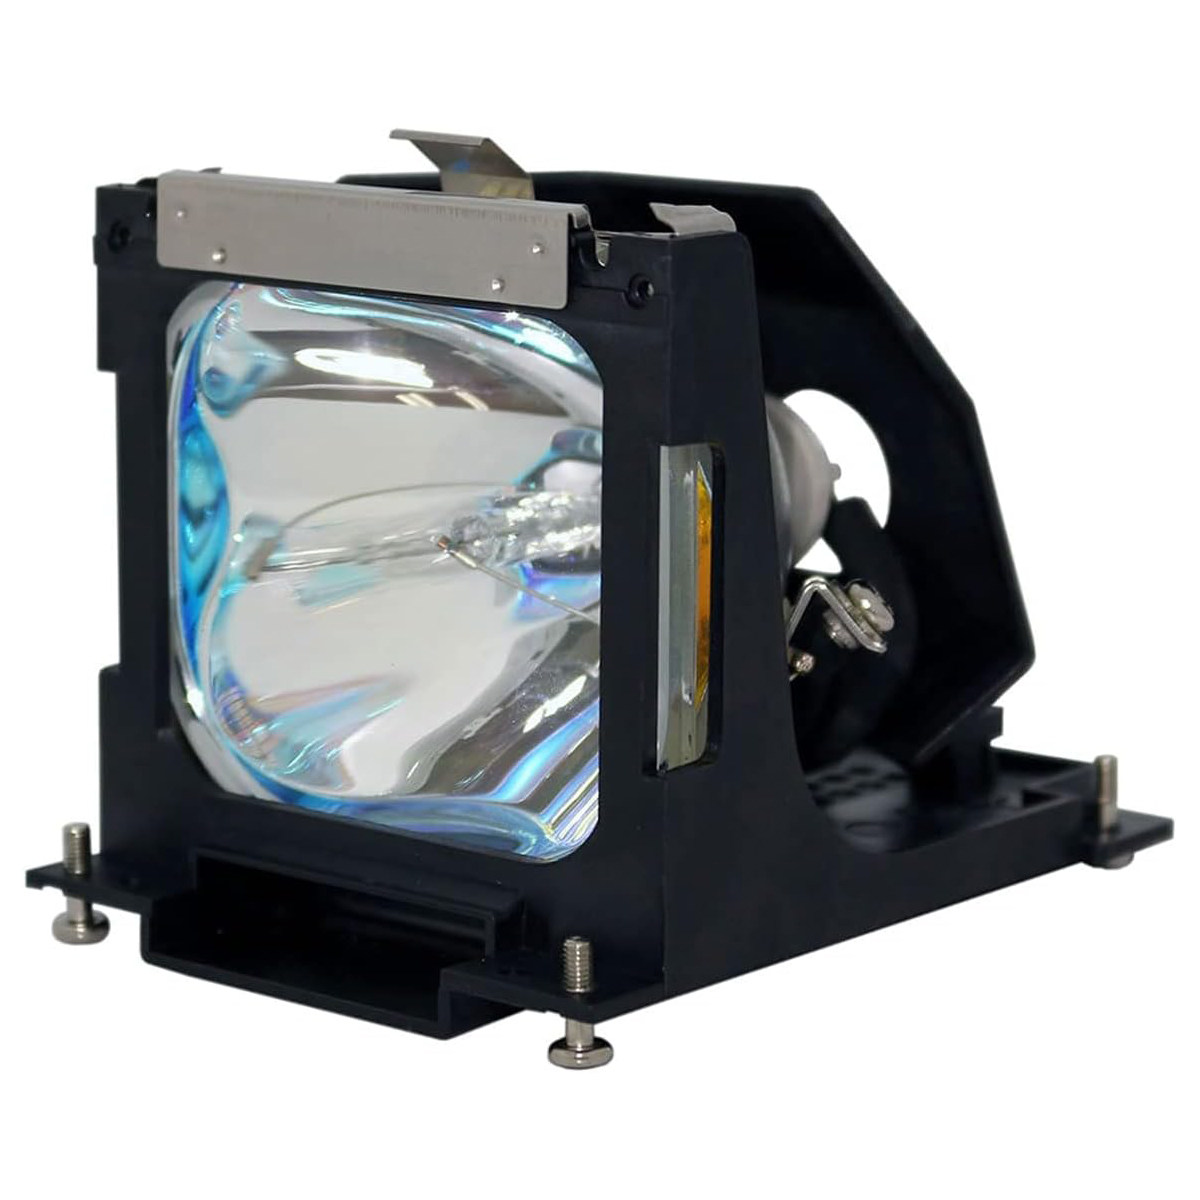 Replacement Projector lamp LV-LP11/7436A001AA For CANON LV-3740 LV-7340 LV-7345 LV-734X